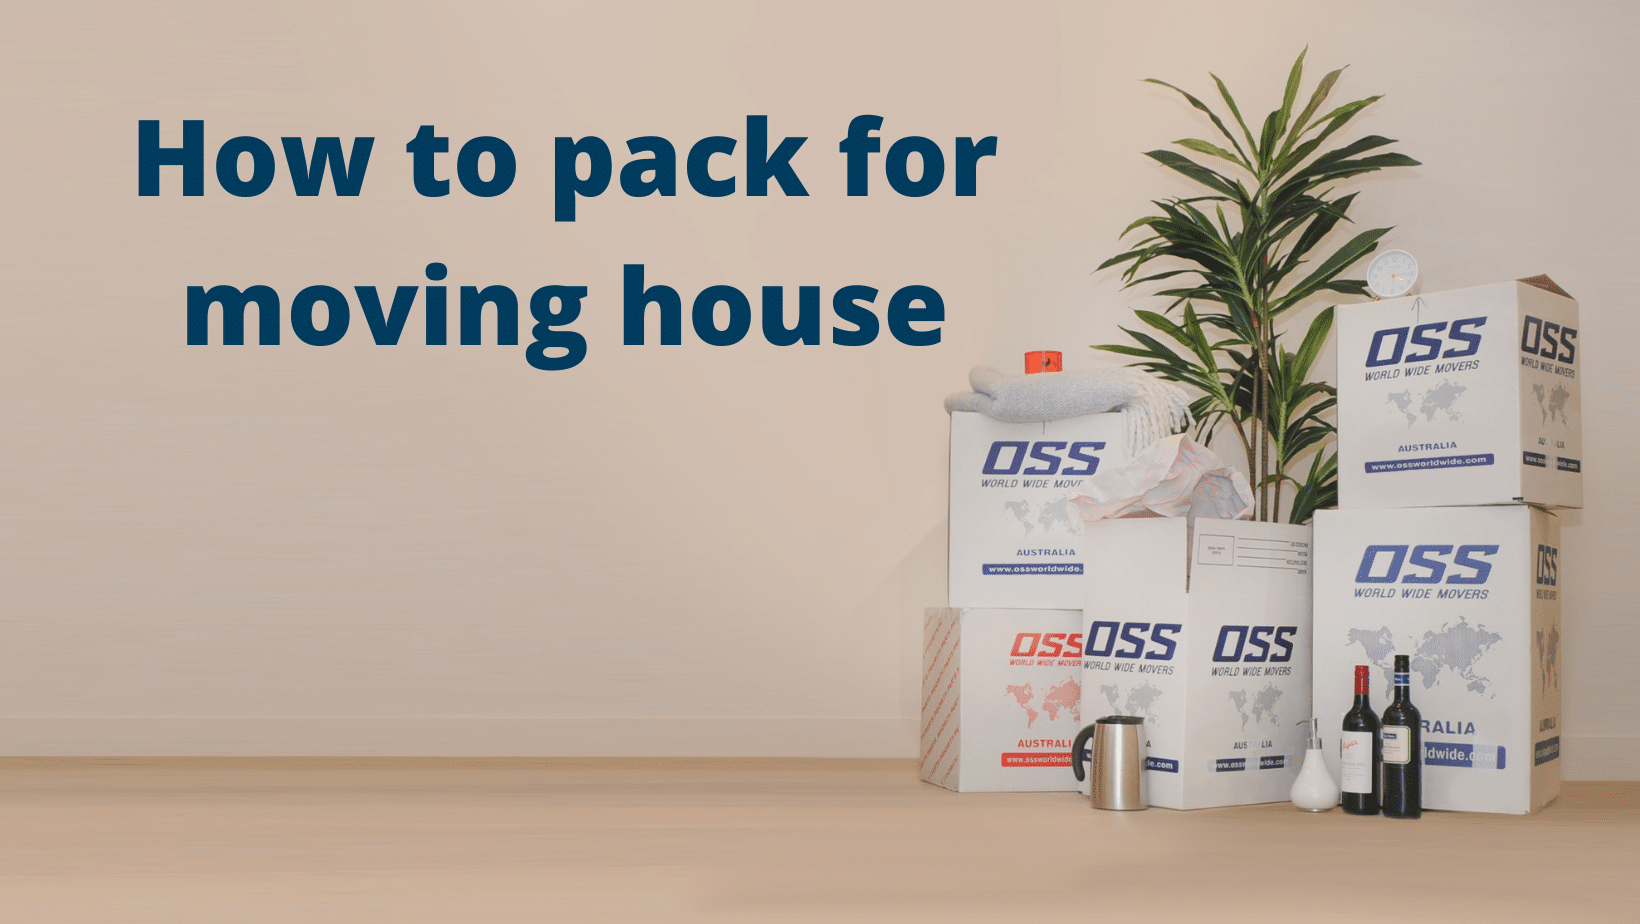 How to pack for moving house - OSS World Wide Movers